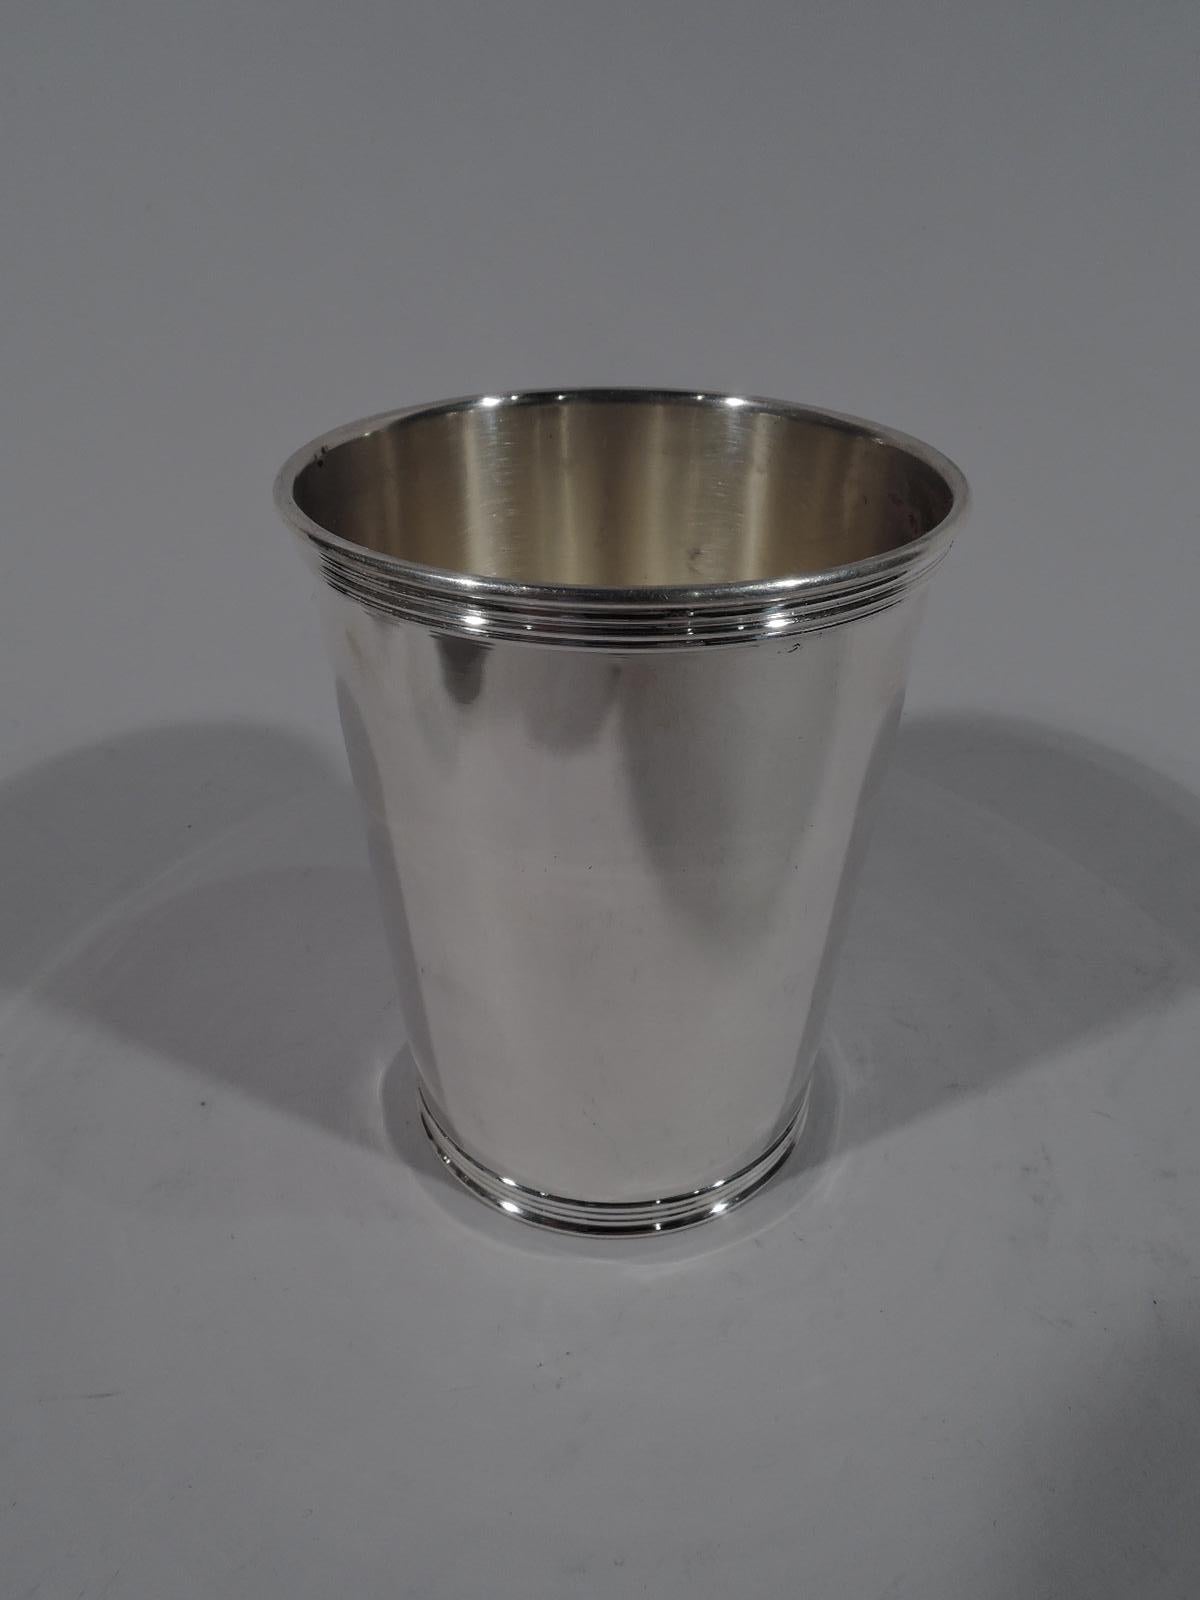 Set of 10 sterling silver mint julep cups. Made by Manchester in Providence. Each straight and tapering sides, and reeded rim and base. Fully marked. Six cups numbered 3759 and 4 cups numbered 3759S. Total weight: 40.5 troy ounces.